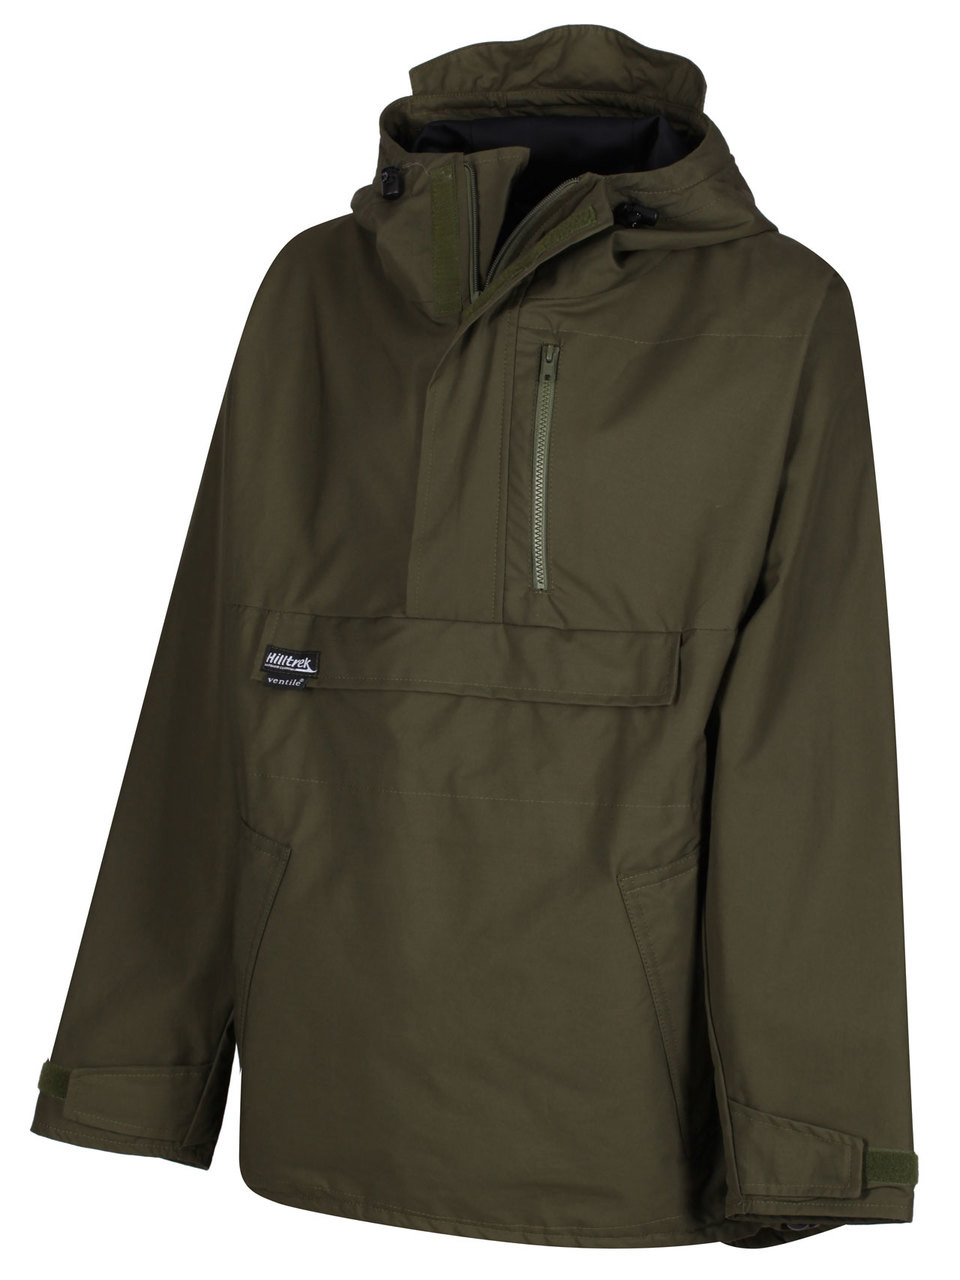 Foinaven Smock in Cotton Analogy® - fully waterproof windshirt